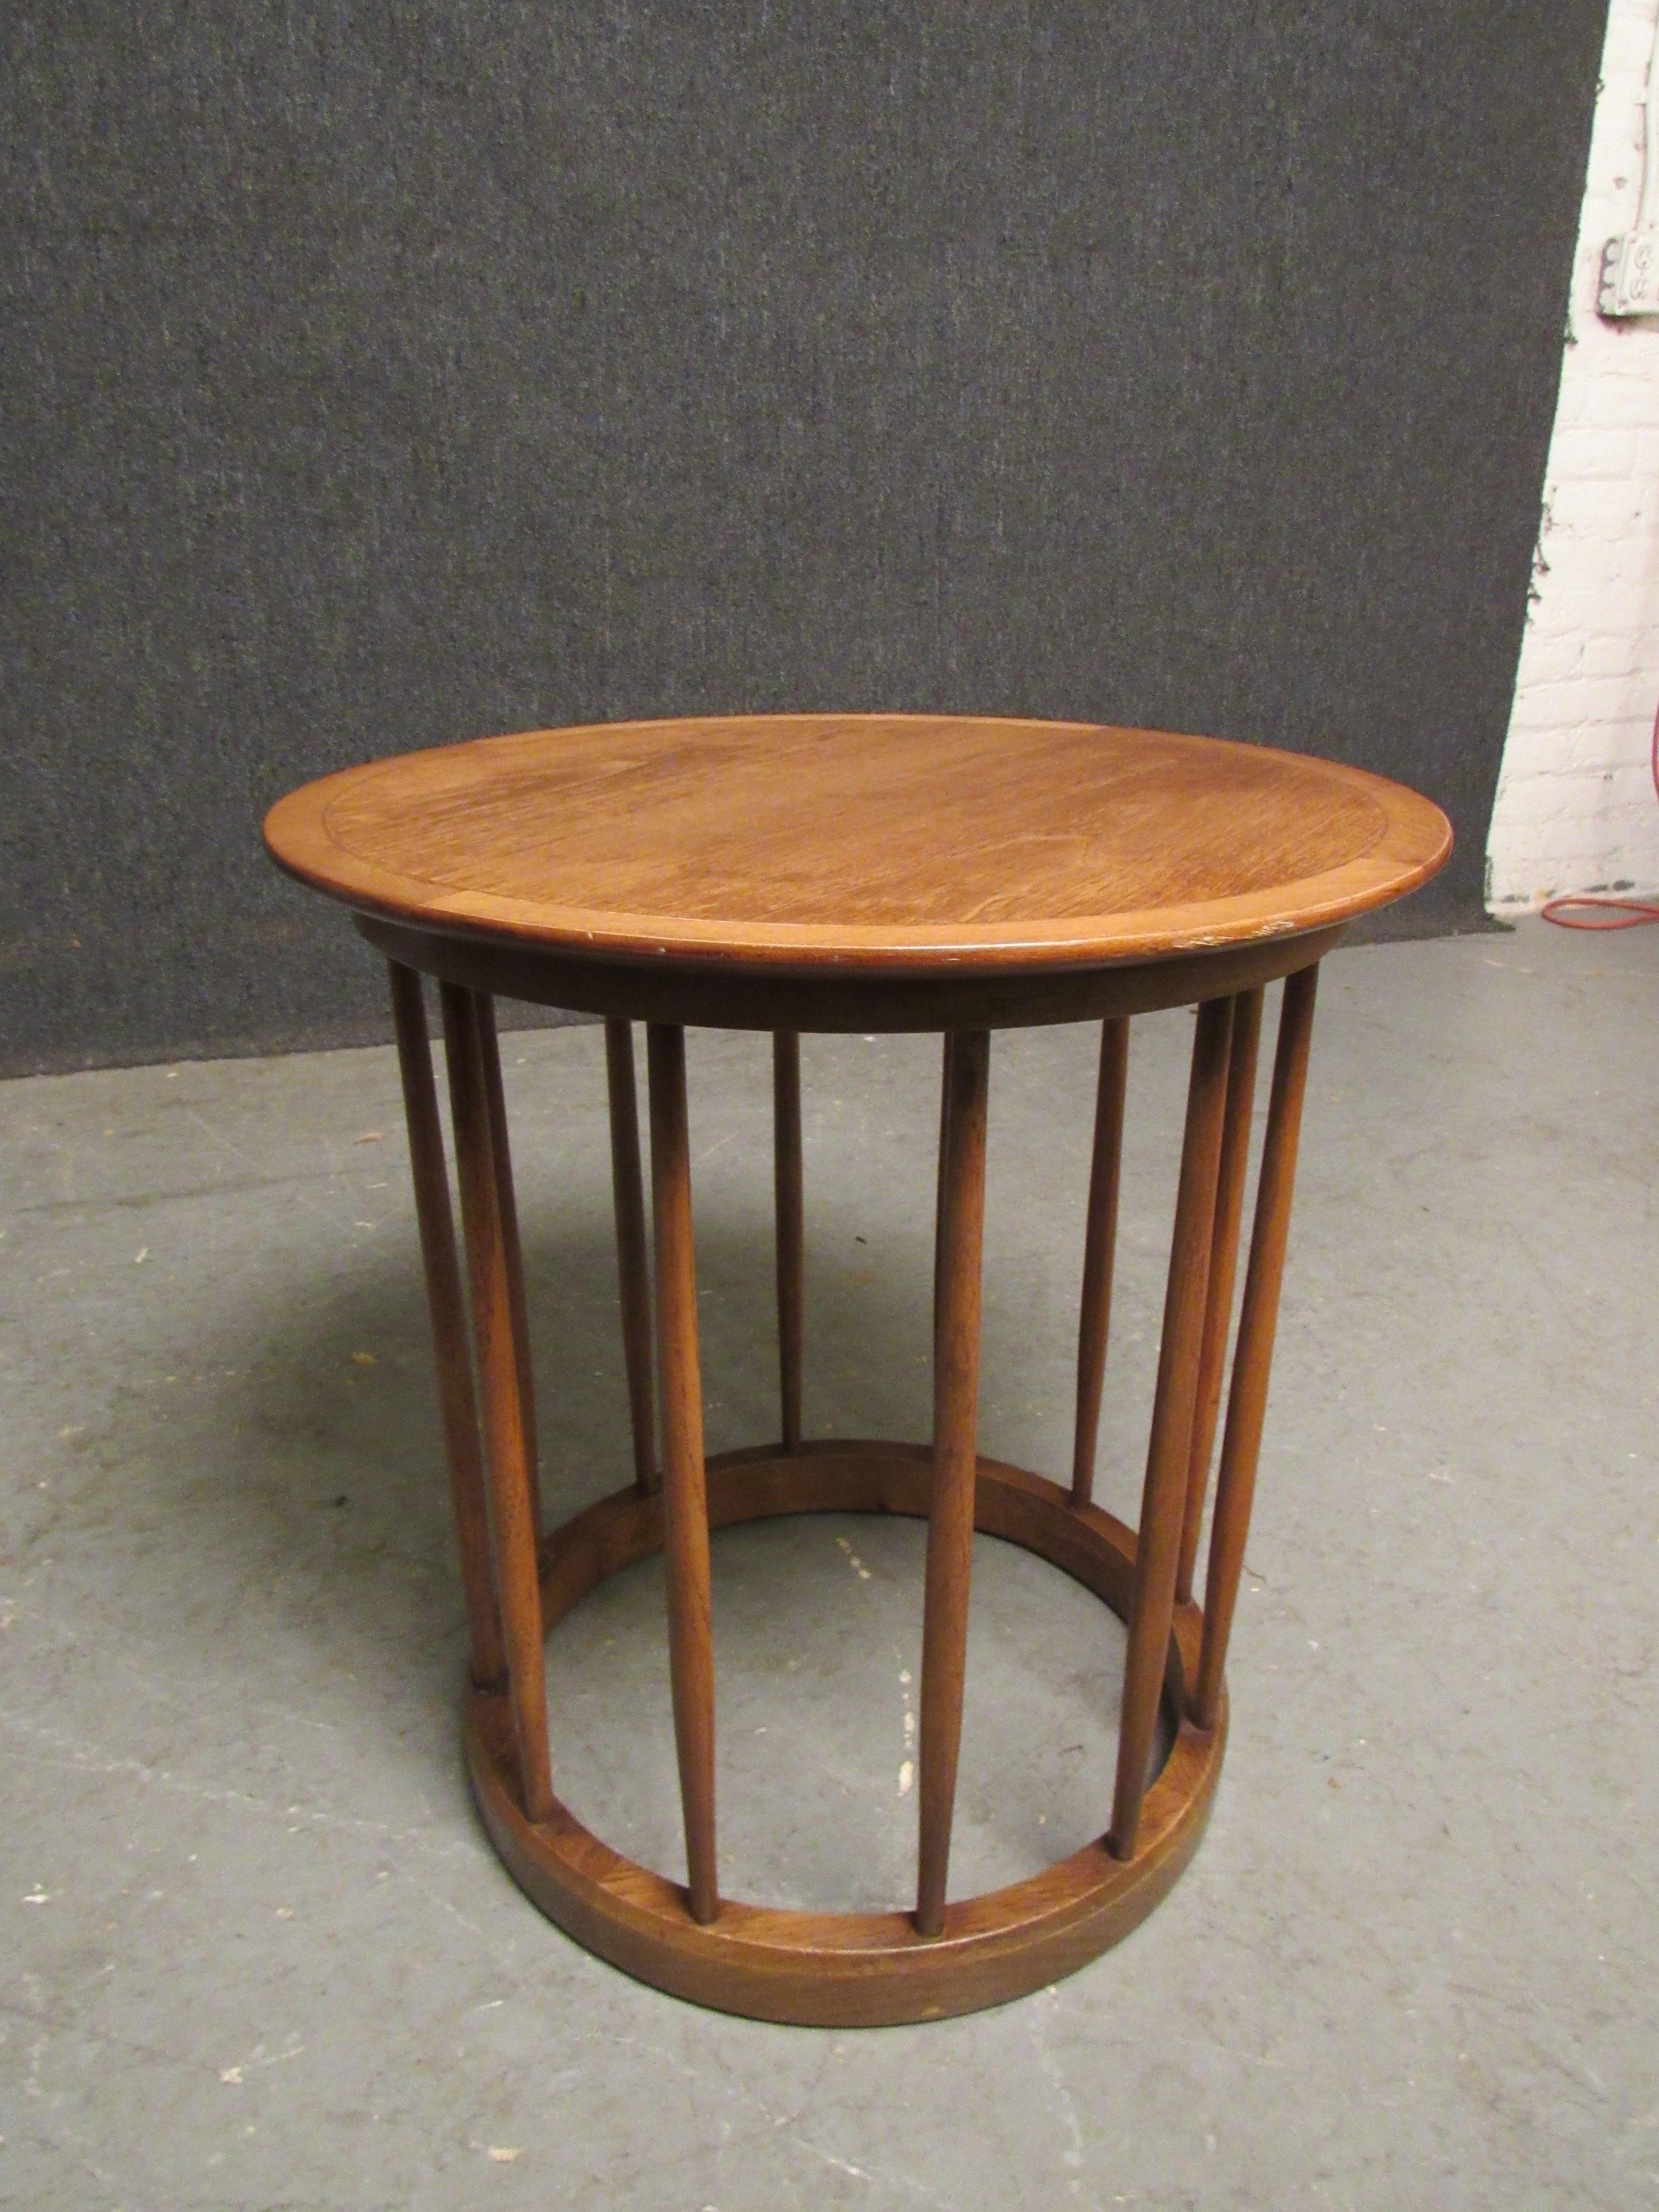 Here is a beautiful vintage American modern side table designed by John Van Koert for Drexel Furniture of North Carolina's iconic 